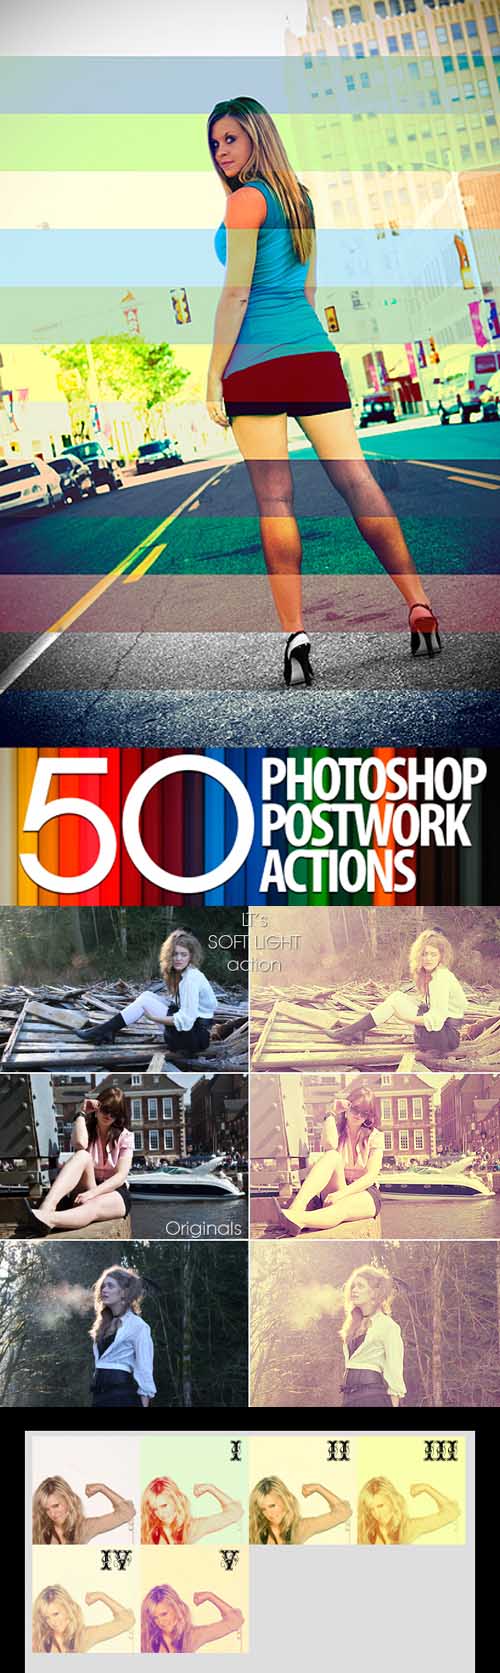 Photoshop Action pack 99